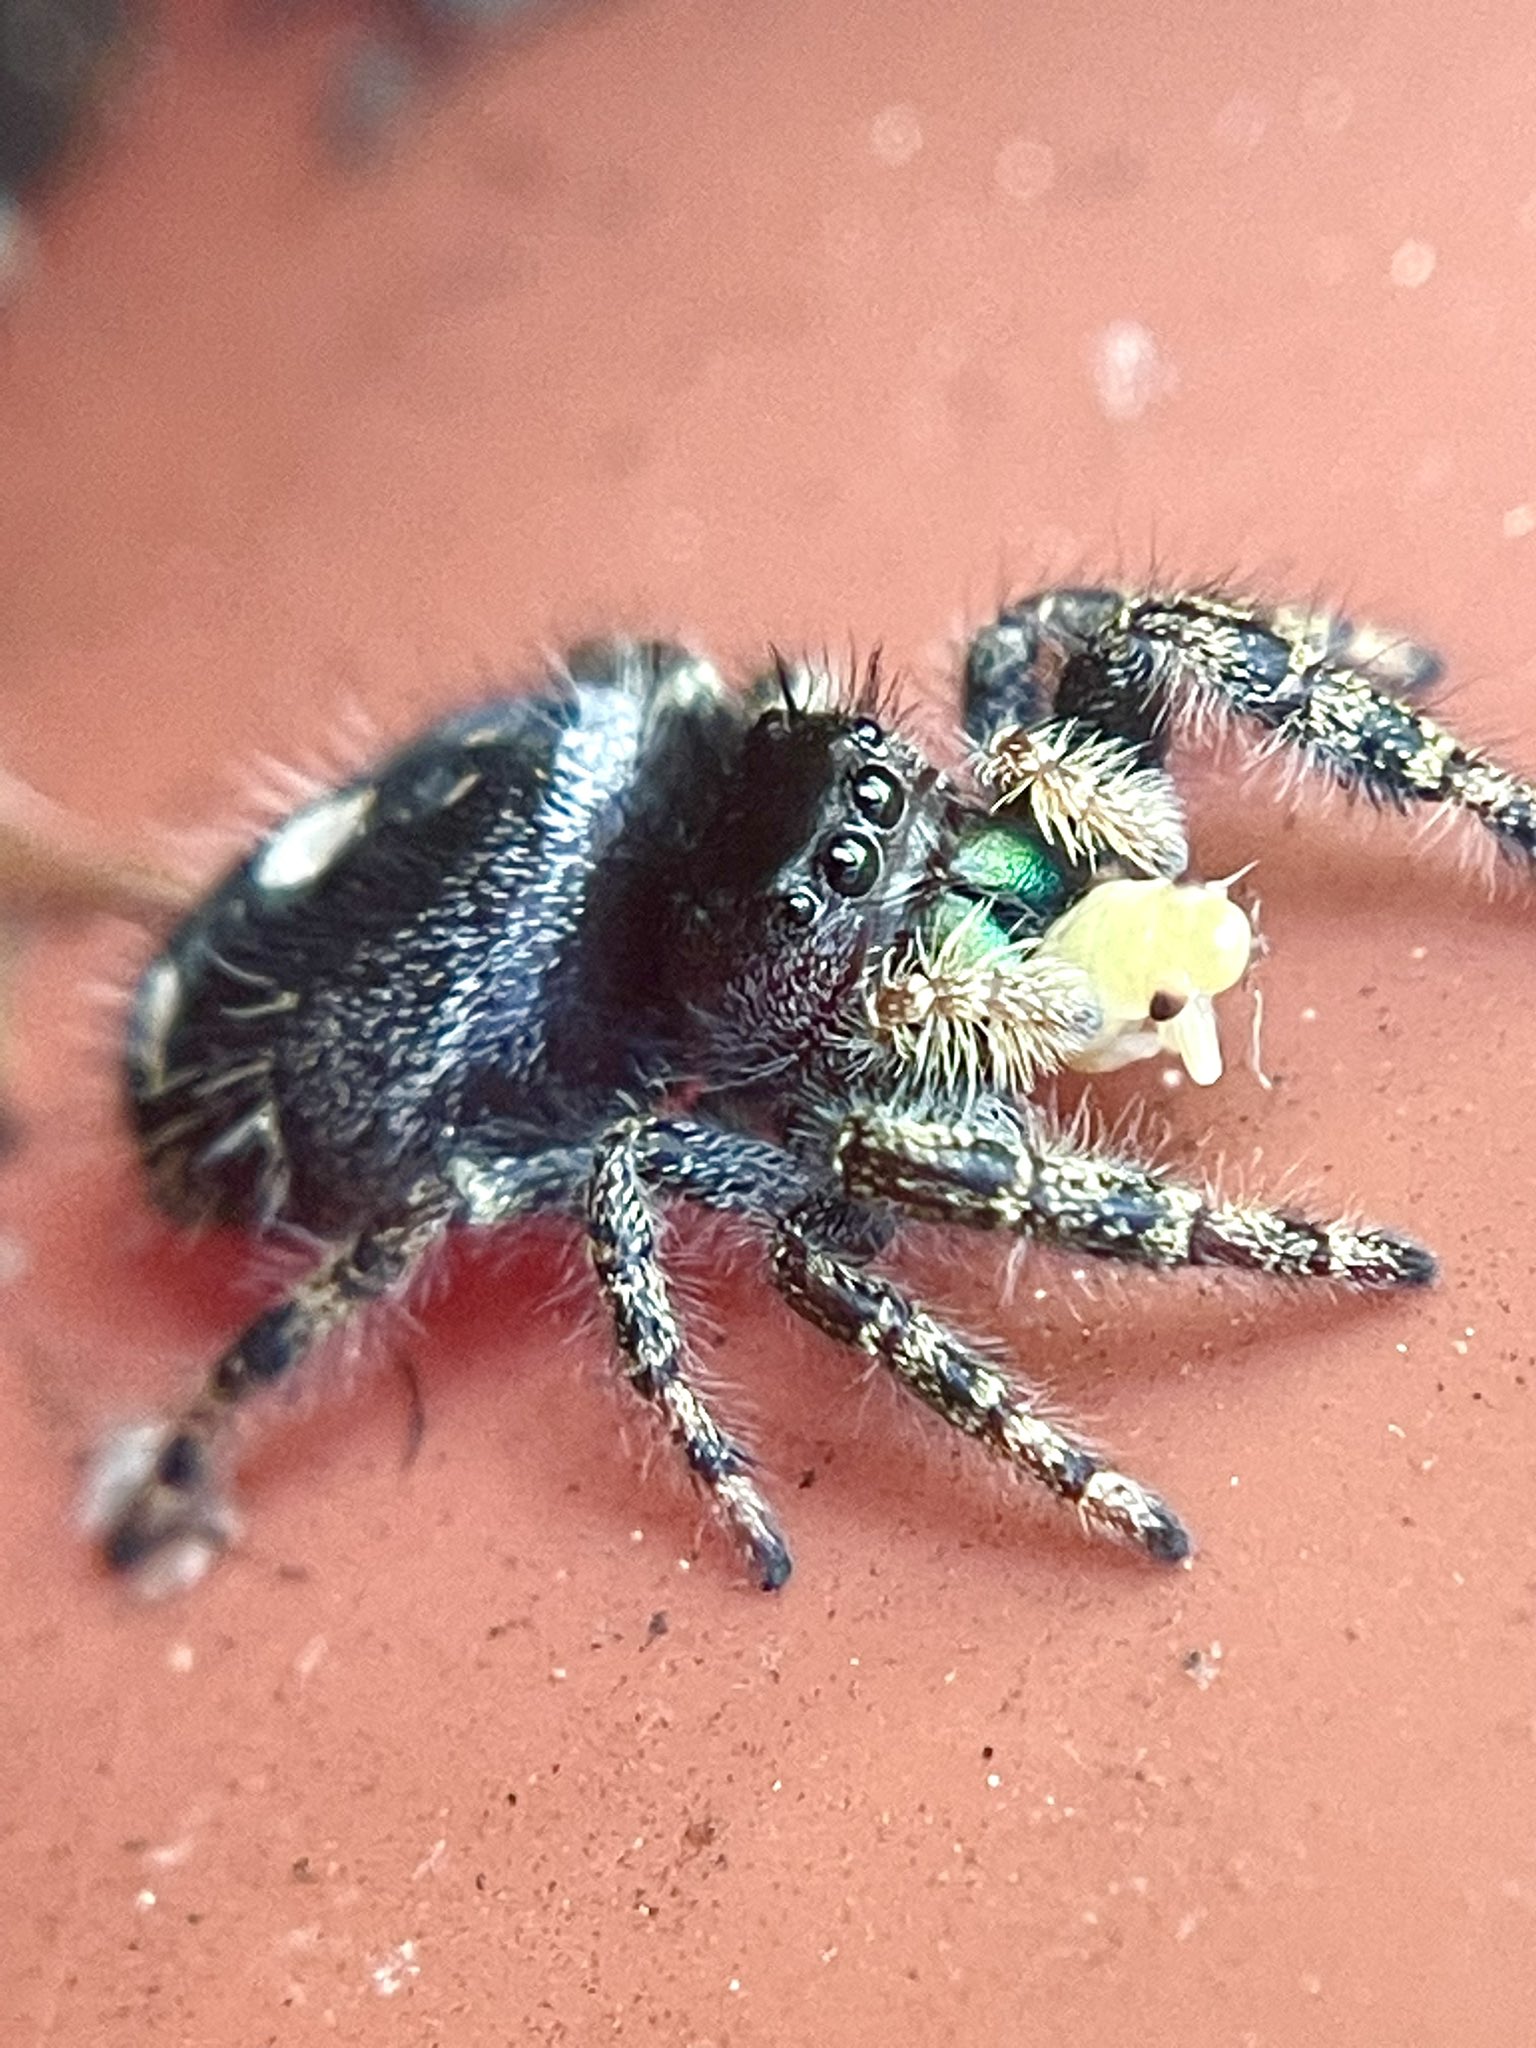 Multimedia Gallery - A bold jumping spider